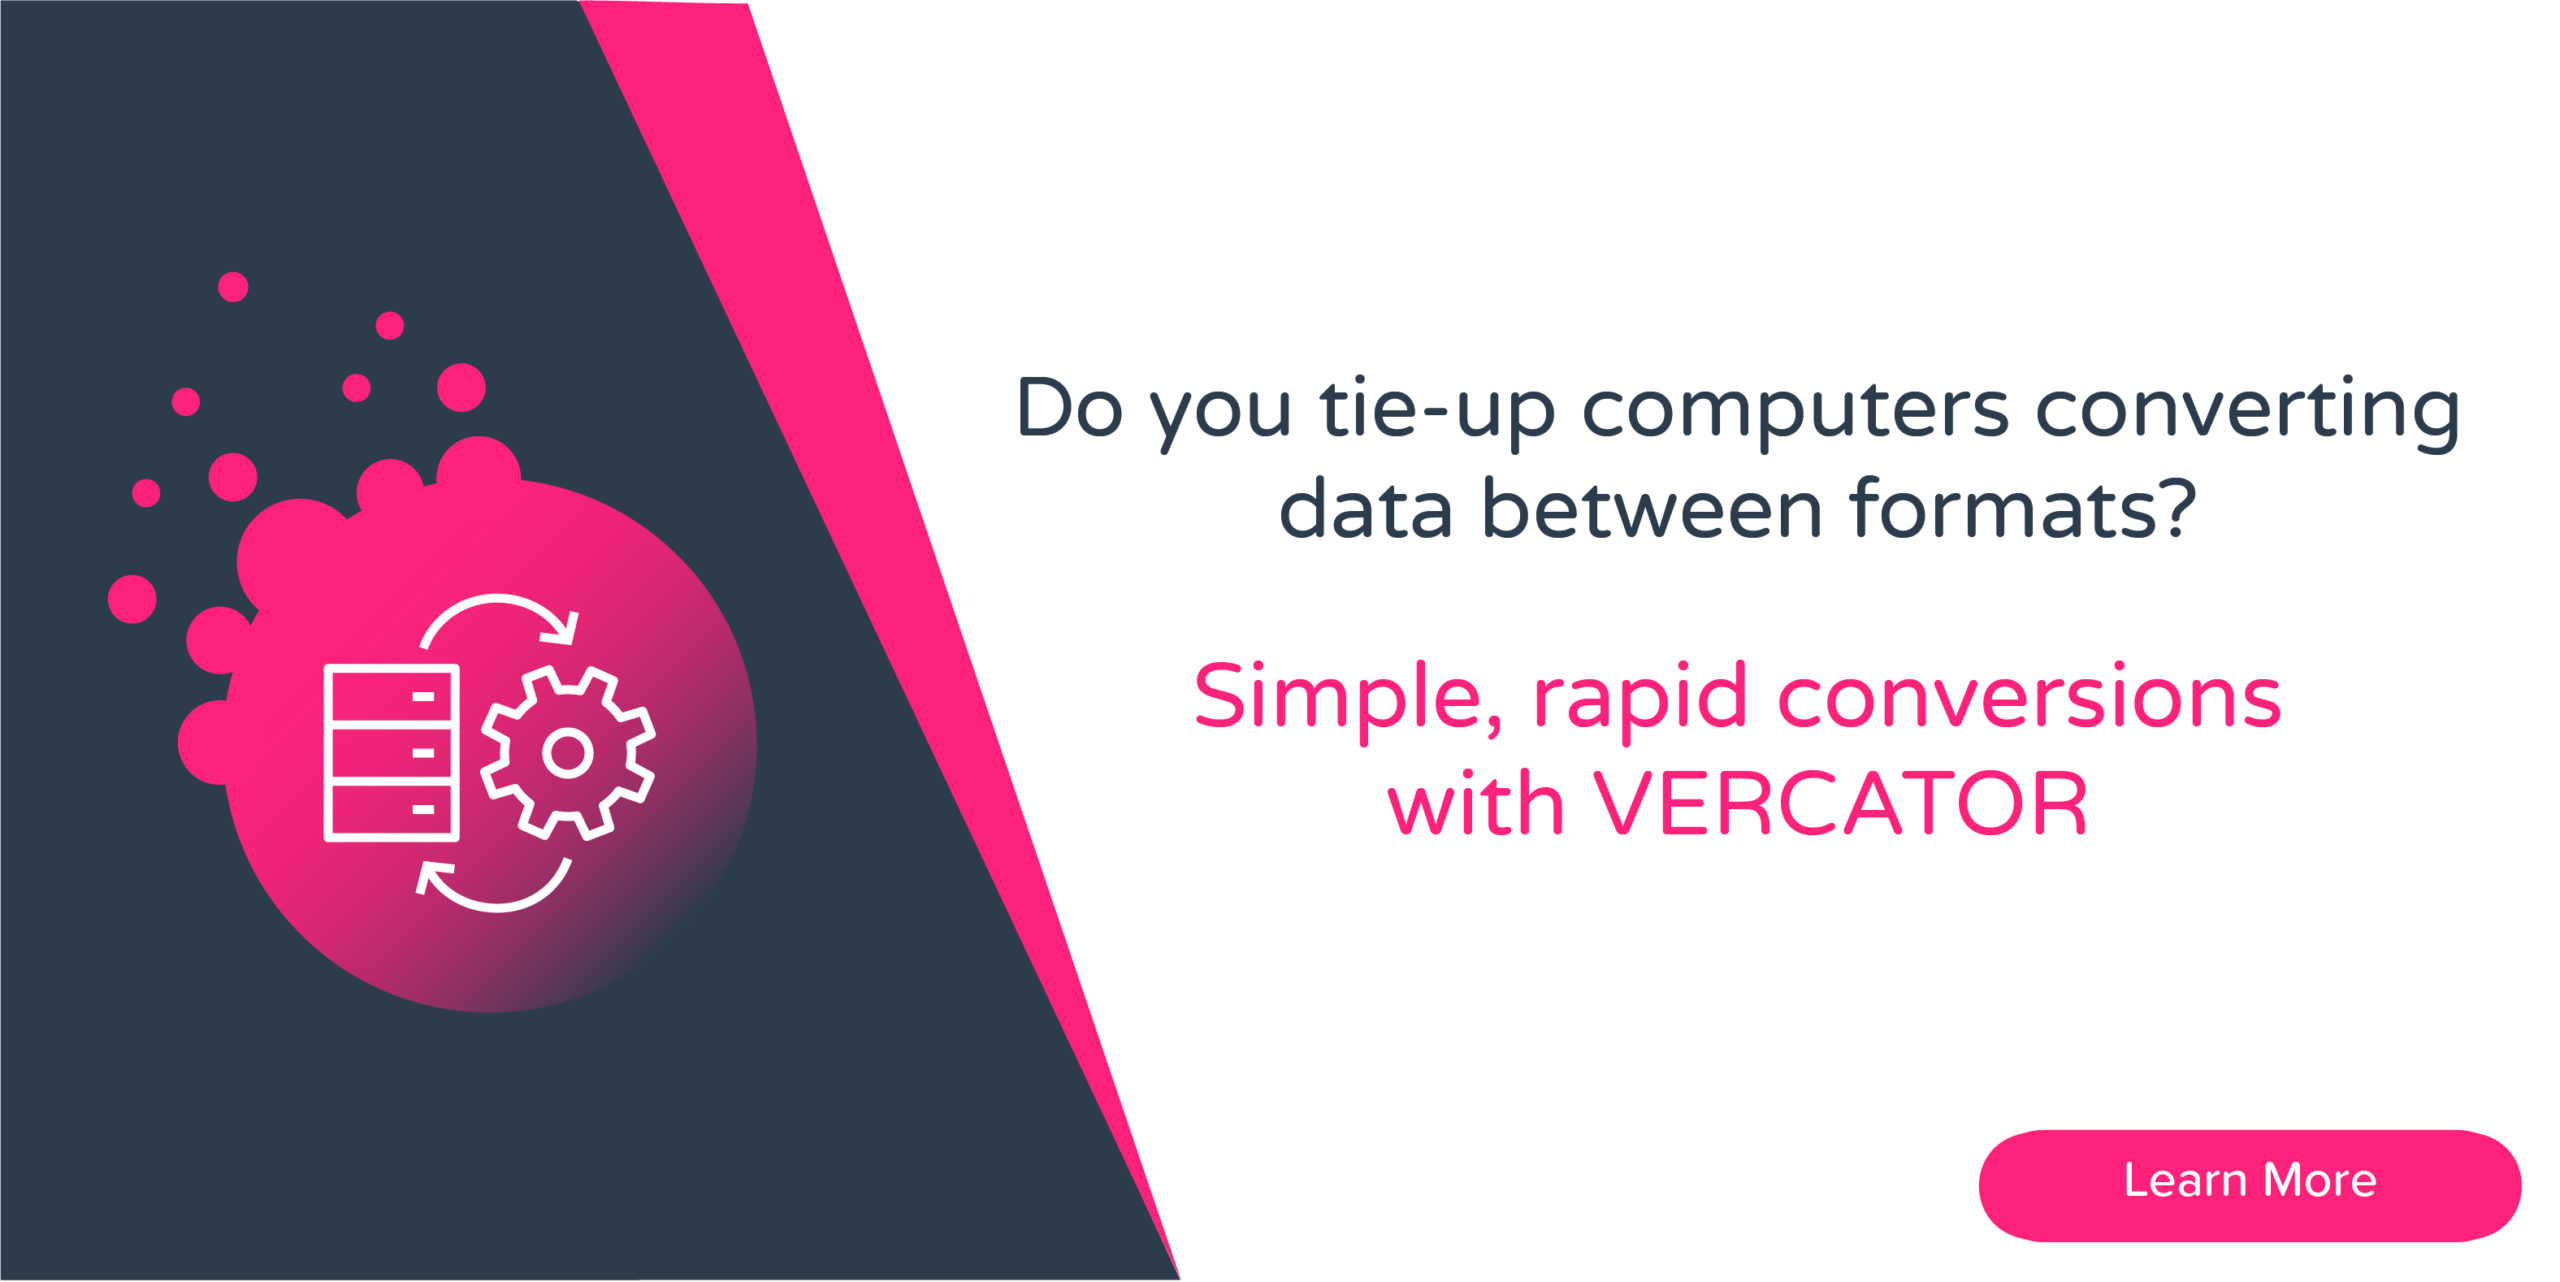 Simple, rapid conversions with VERCATOR